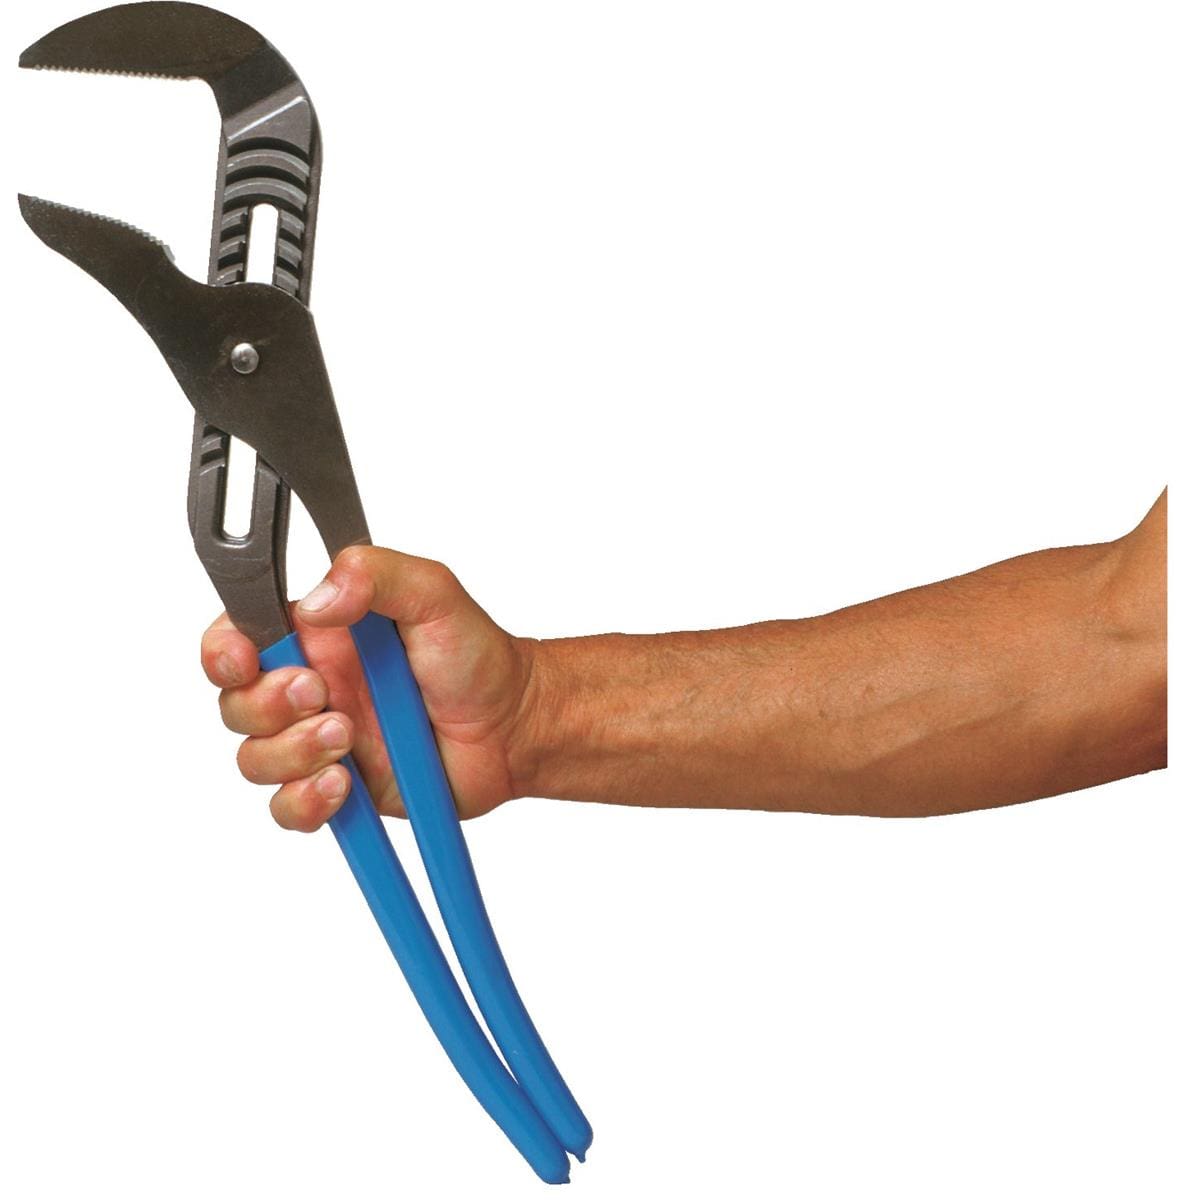 Channellock OF-2 CHANNELLOCK Oil Filter Pliers